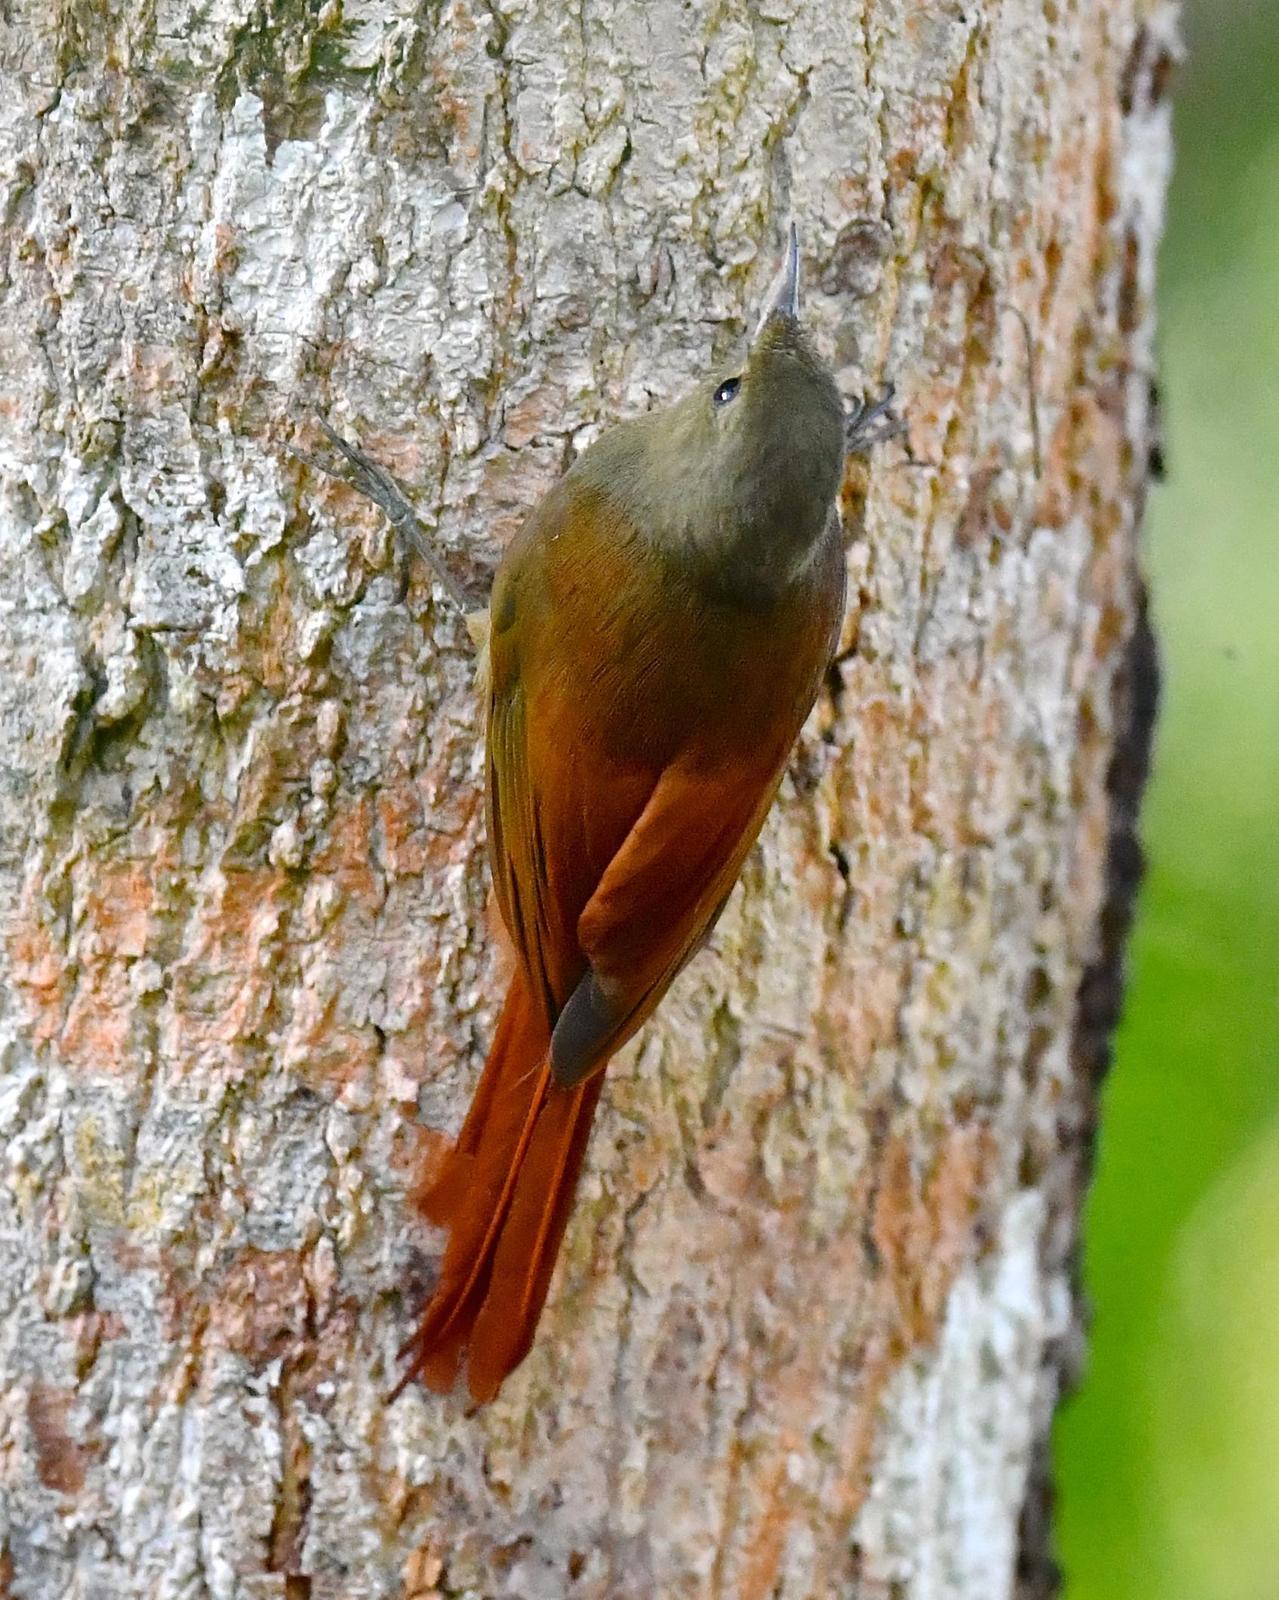 Olivaceous Woodcreeper Photo by Gerald Friesen